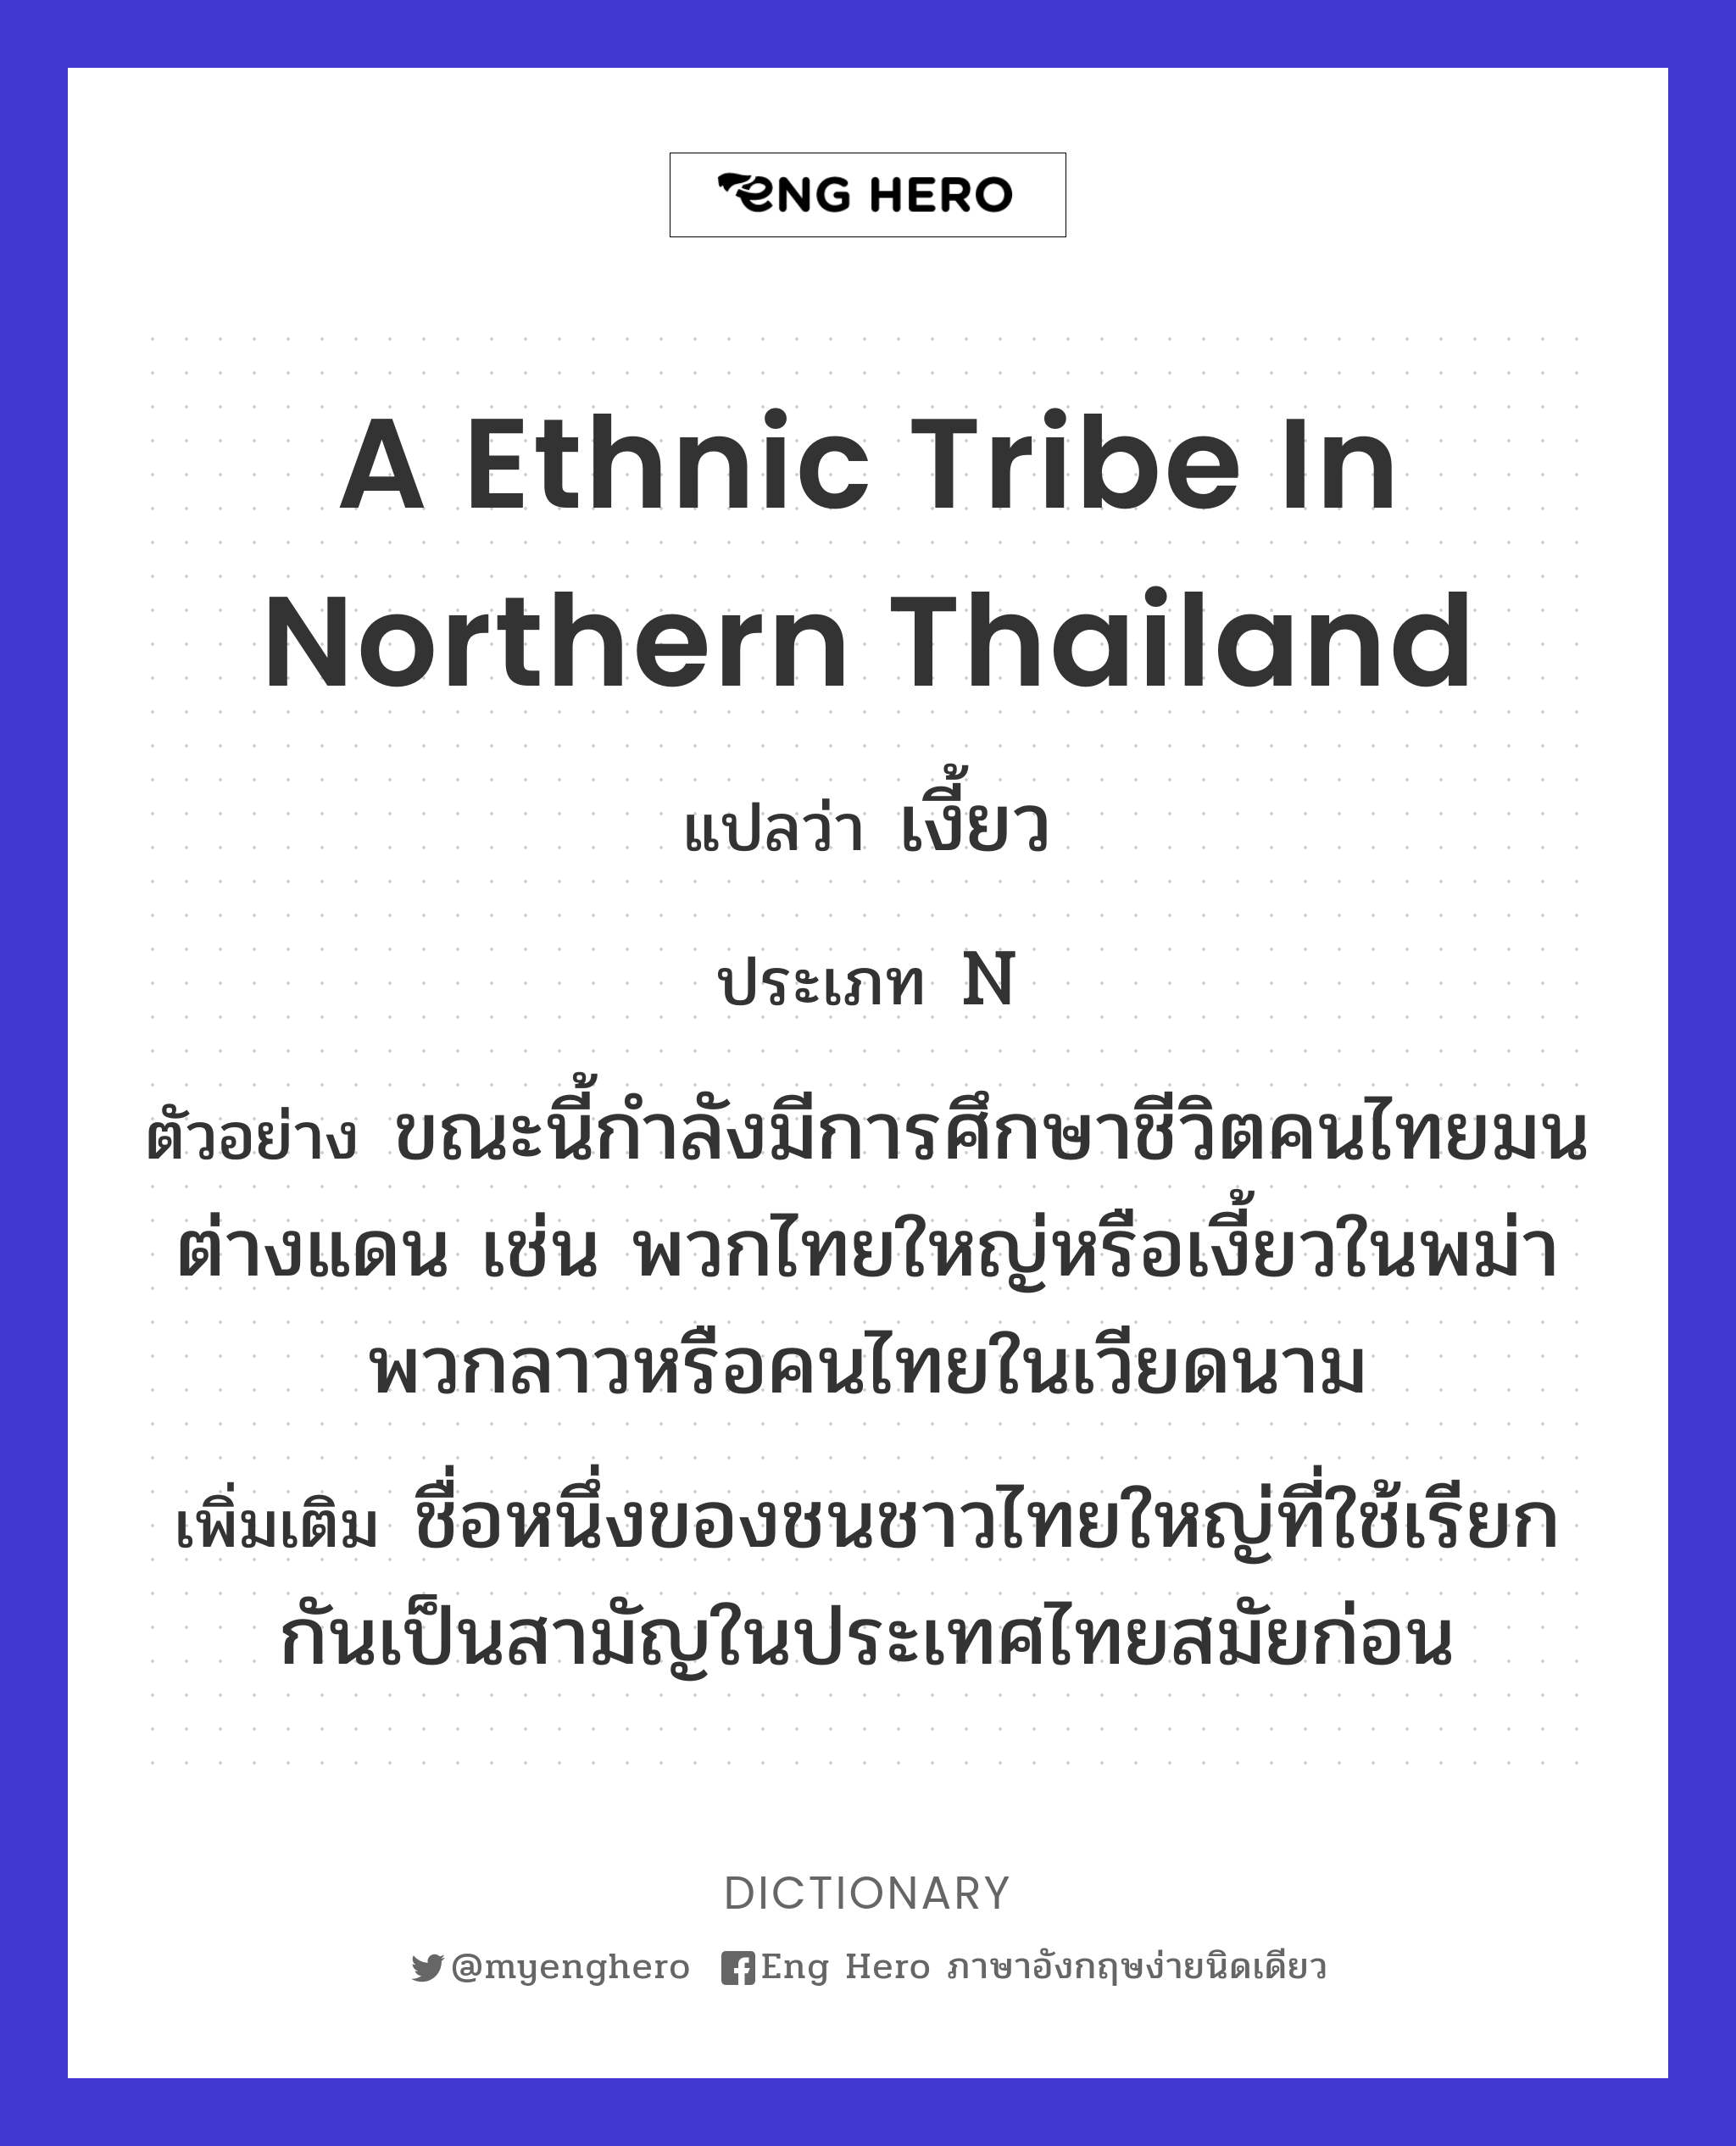 a ethnic tribe in northern Thailand